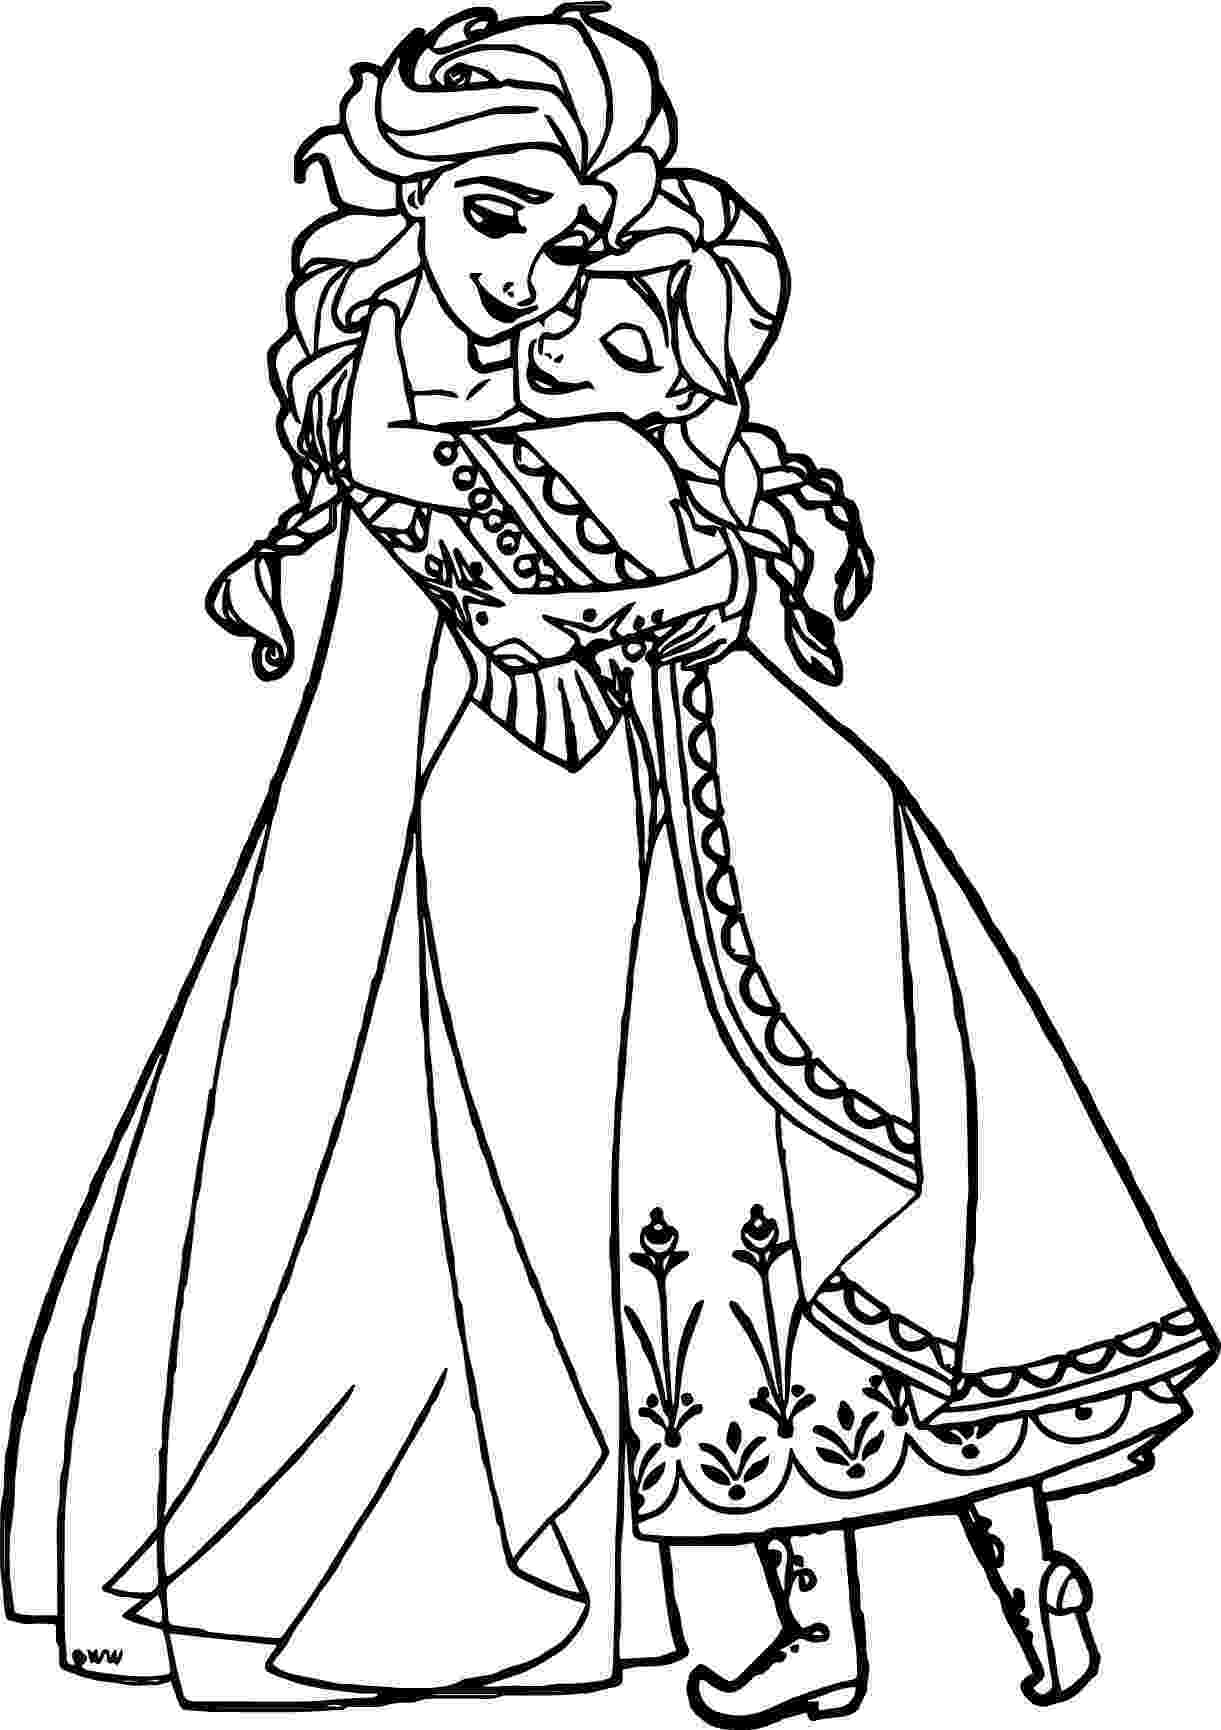 anna and elsa pictures to color disney39s frozen coloring pages disneyclipscom color elsa and anna to pictures 